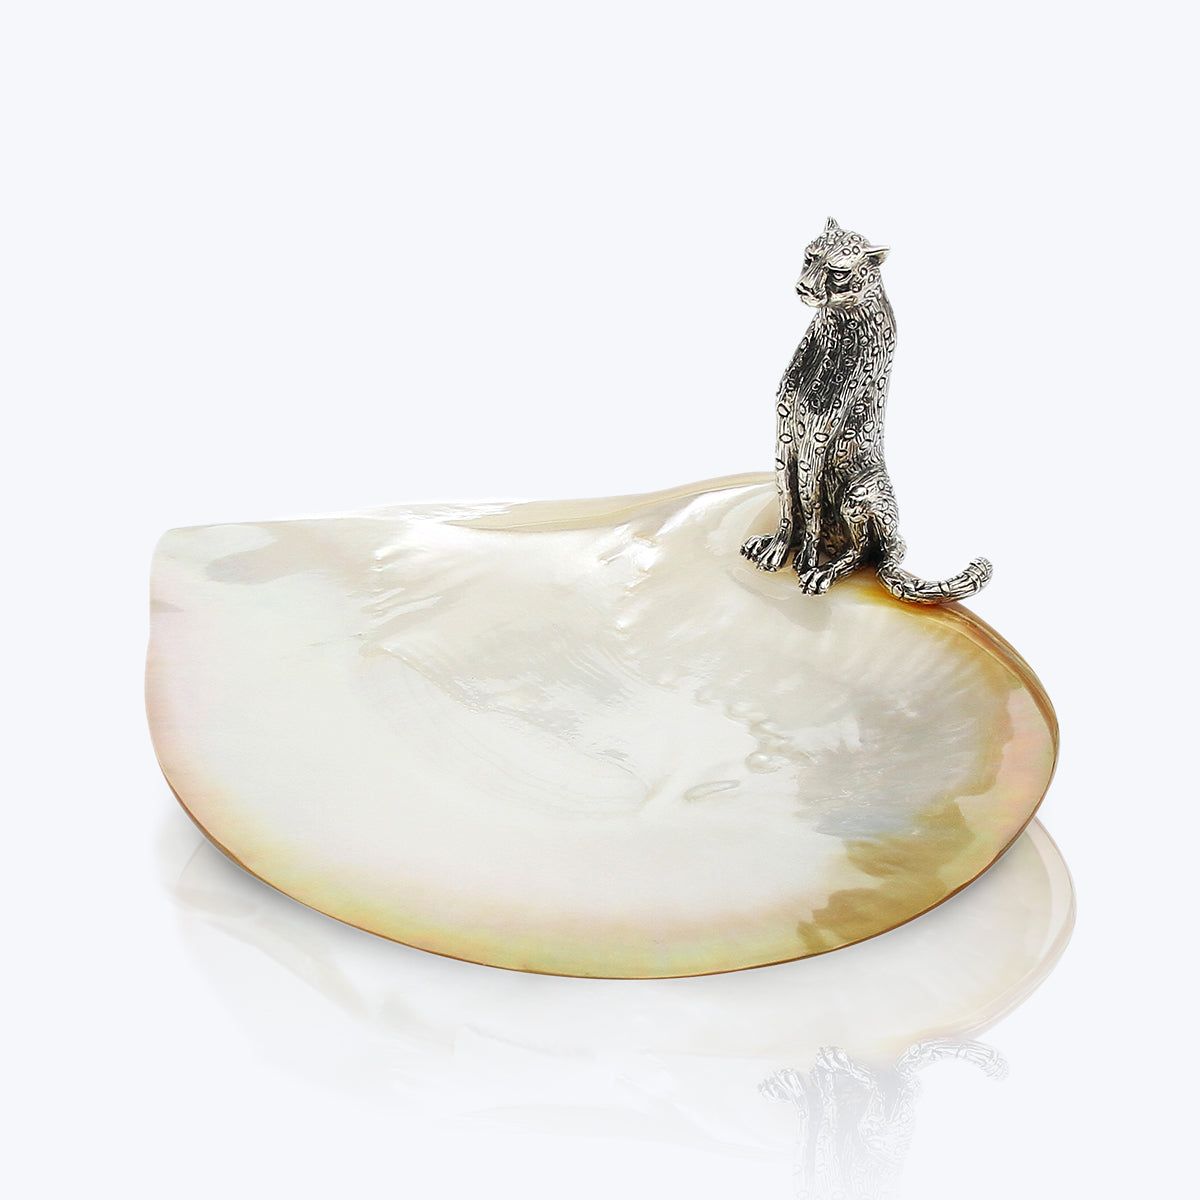 Mother of Pearl Plate with Cheetah